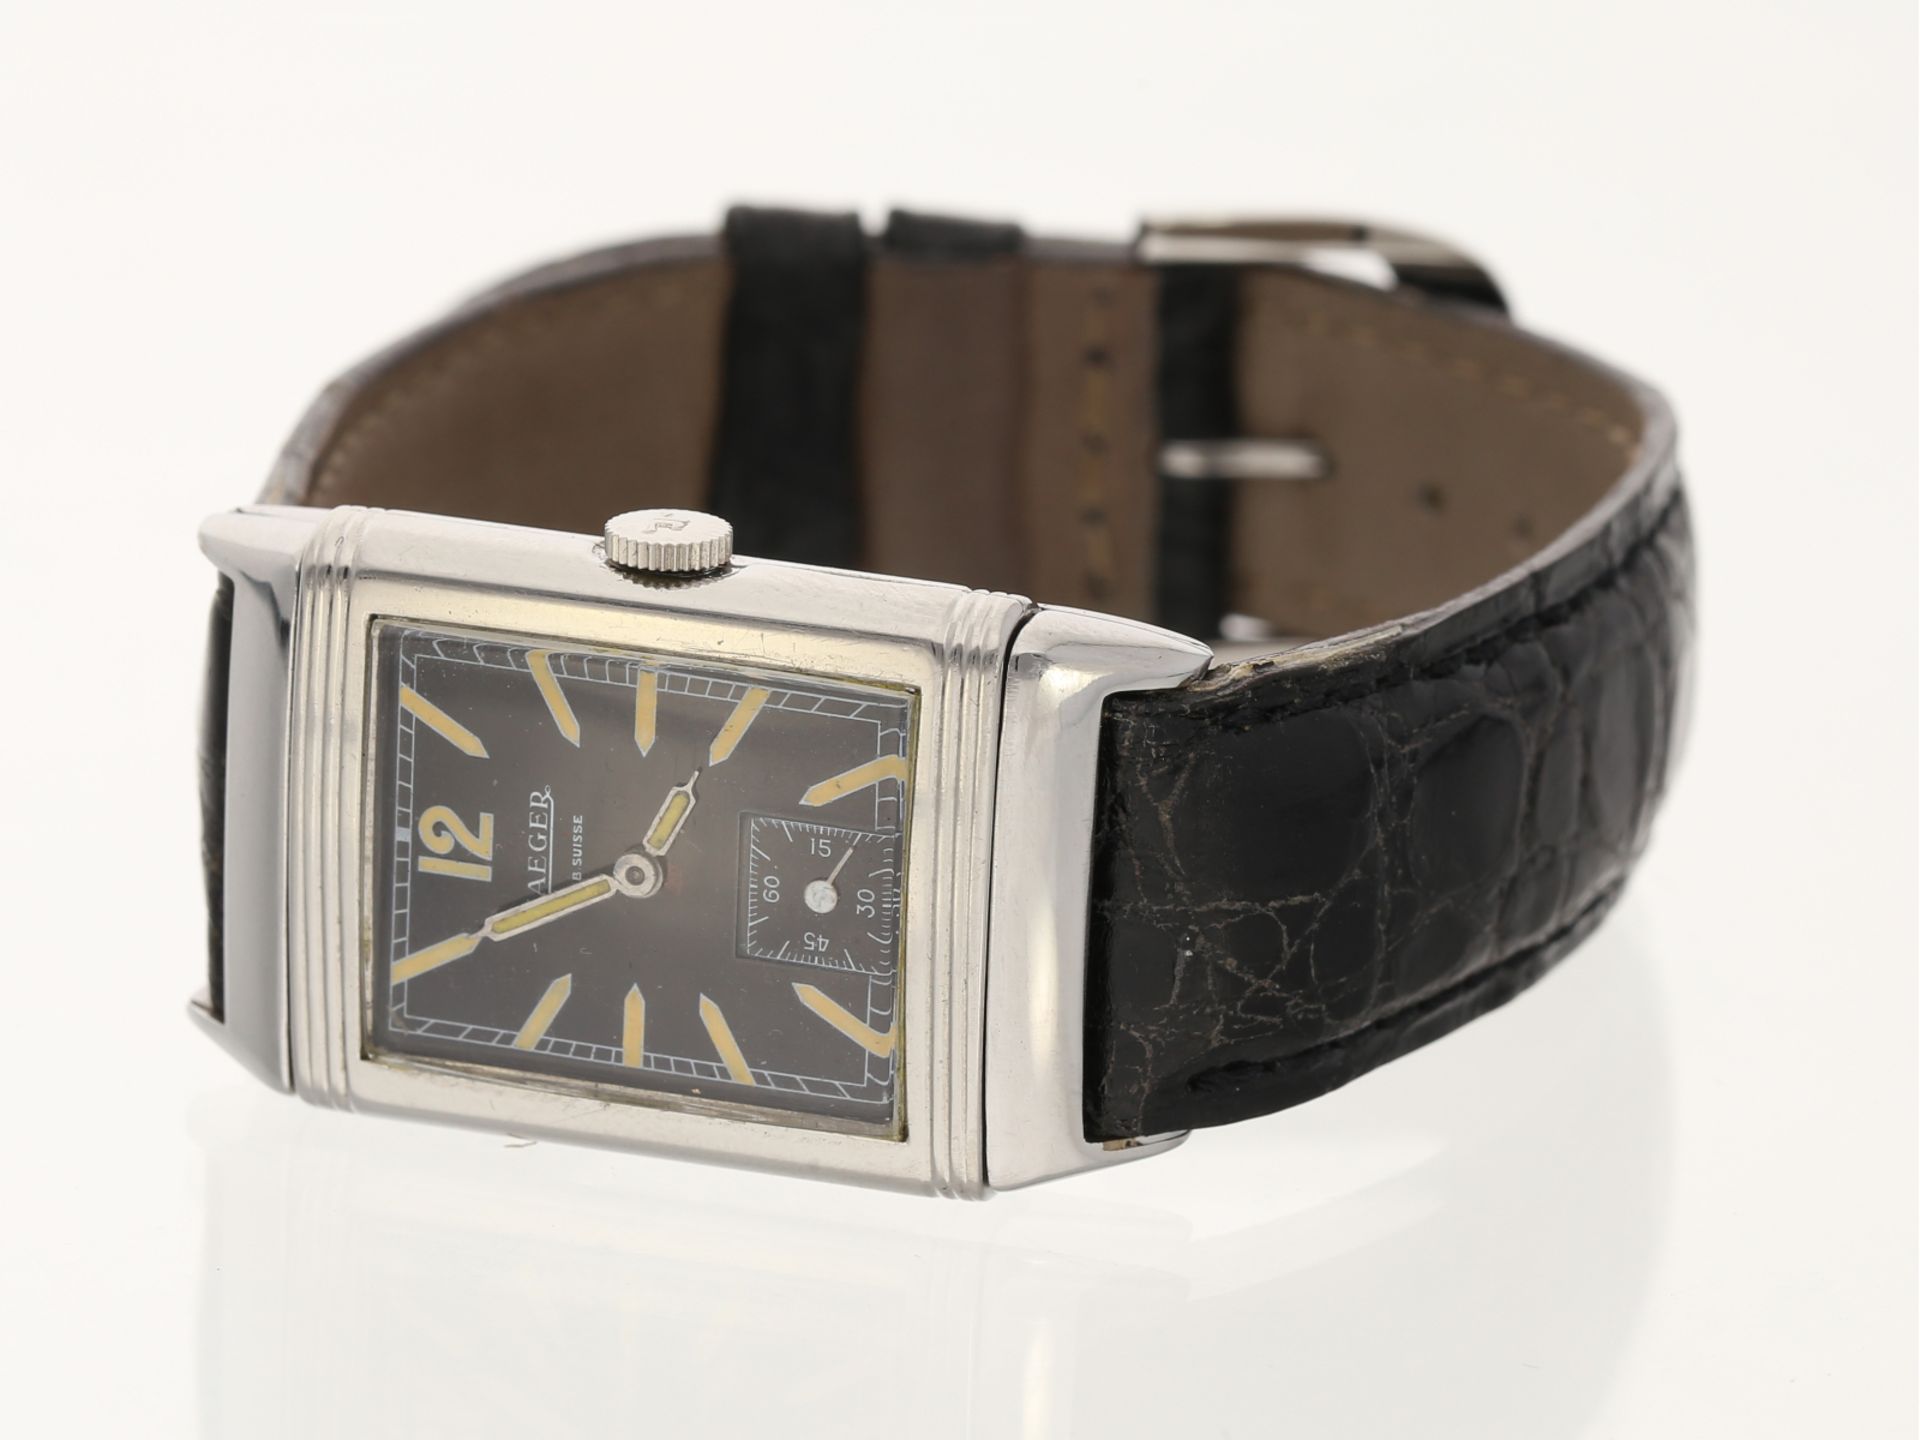 Armbanduhr: sehr frühes Modell der Jaeger-LeCoultre Reverso in Stahl, ca. 1930 - Image 2 of 5